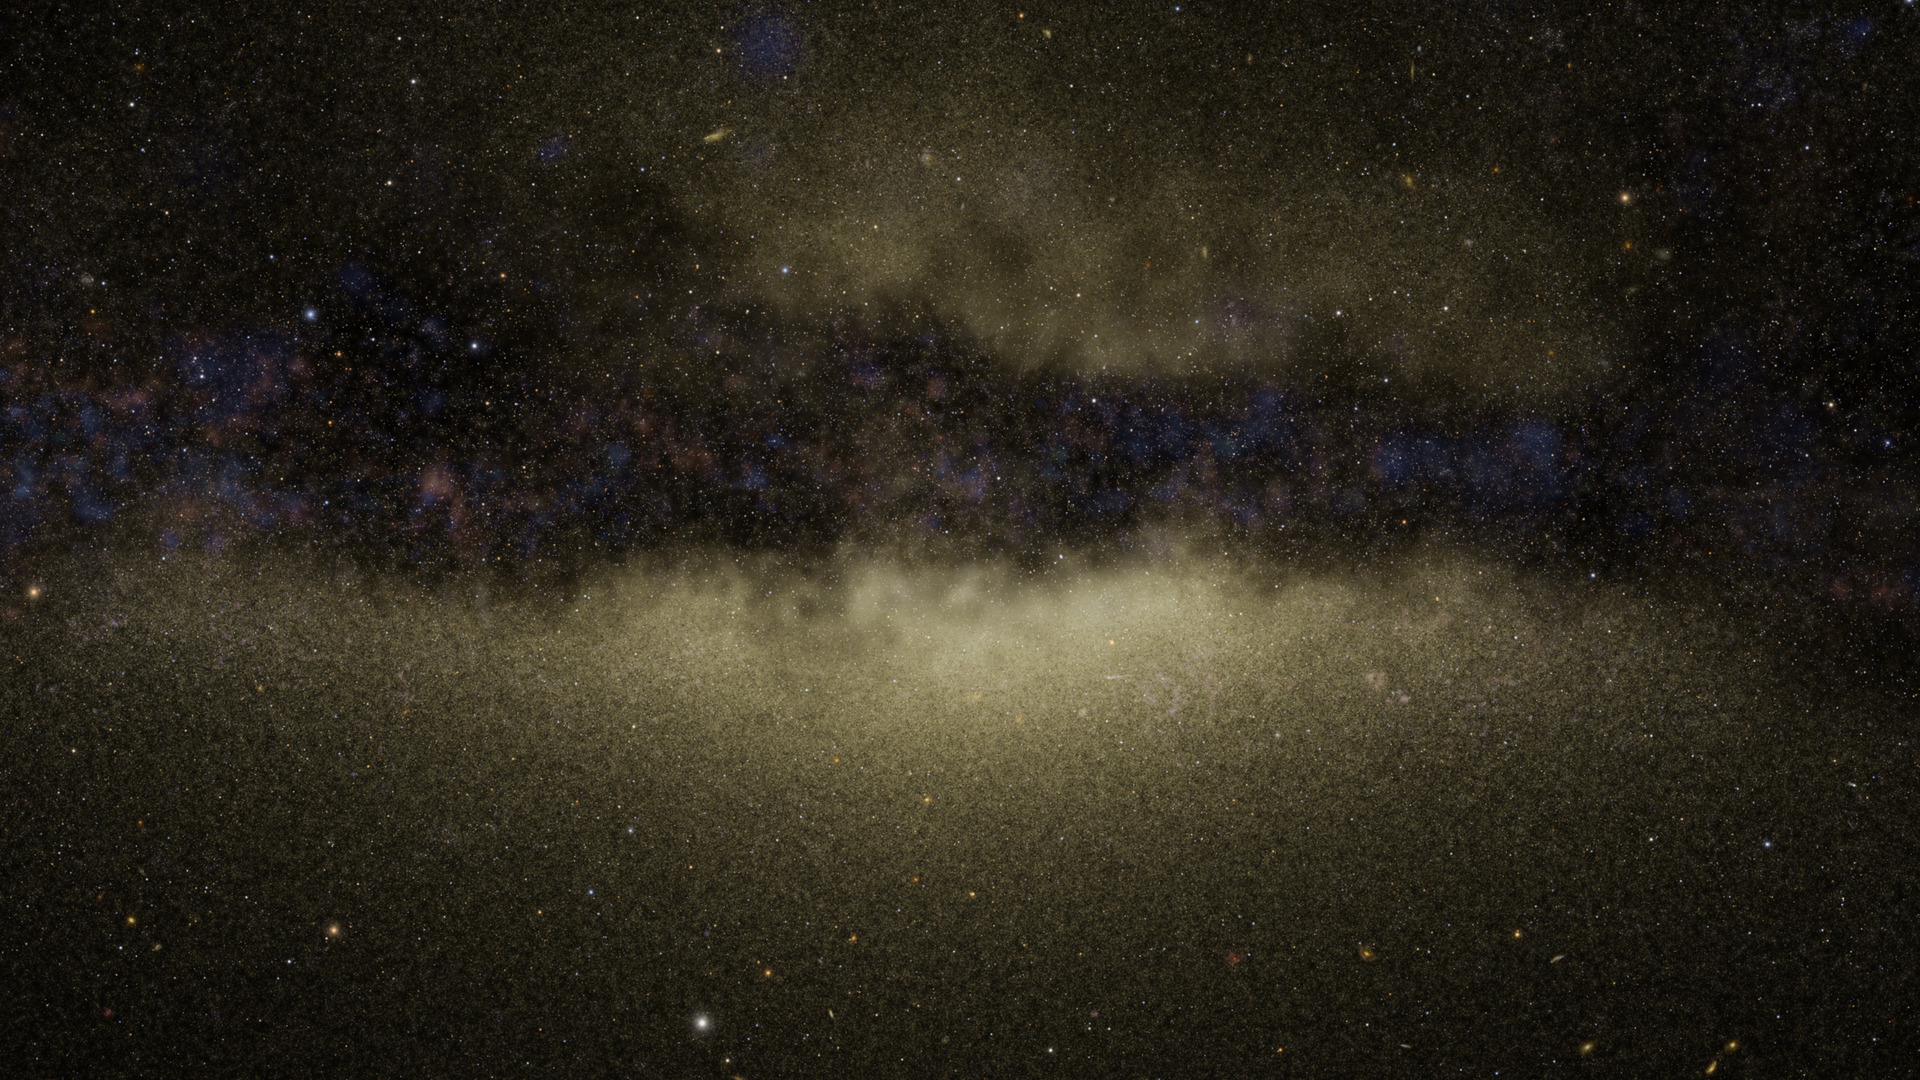 Based on a computer simulation, this visualization explores the disk, bulge, and spiral arms of a spiral galaxy.